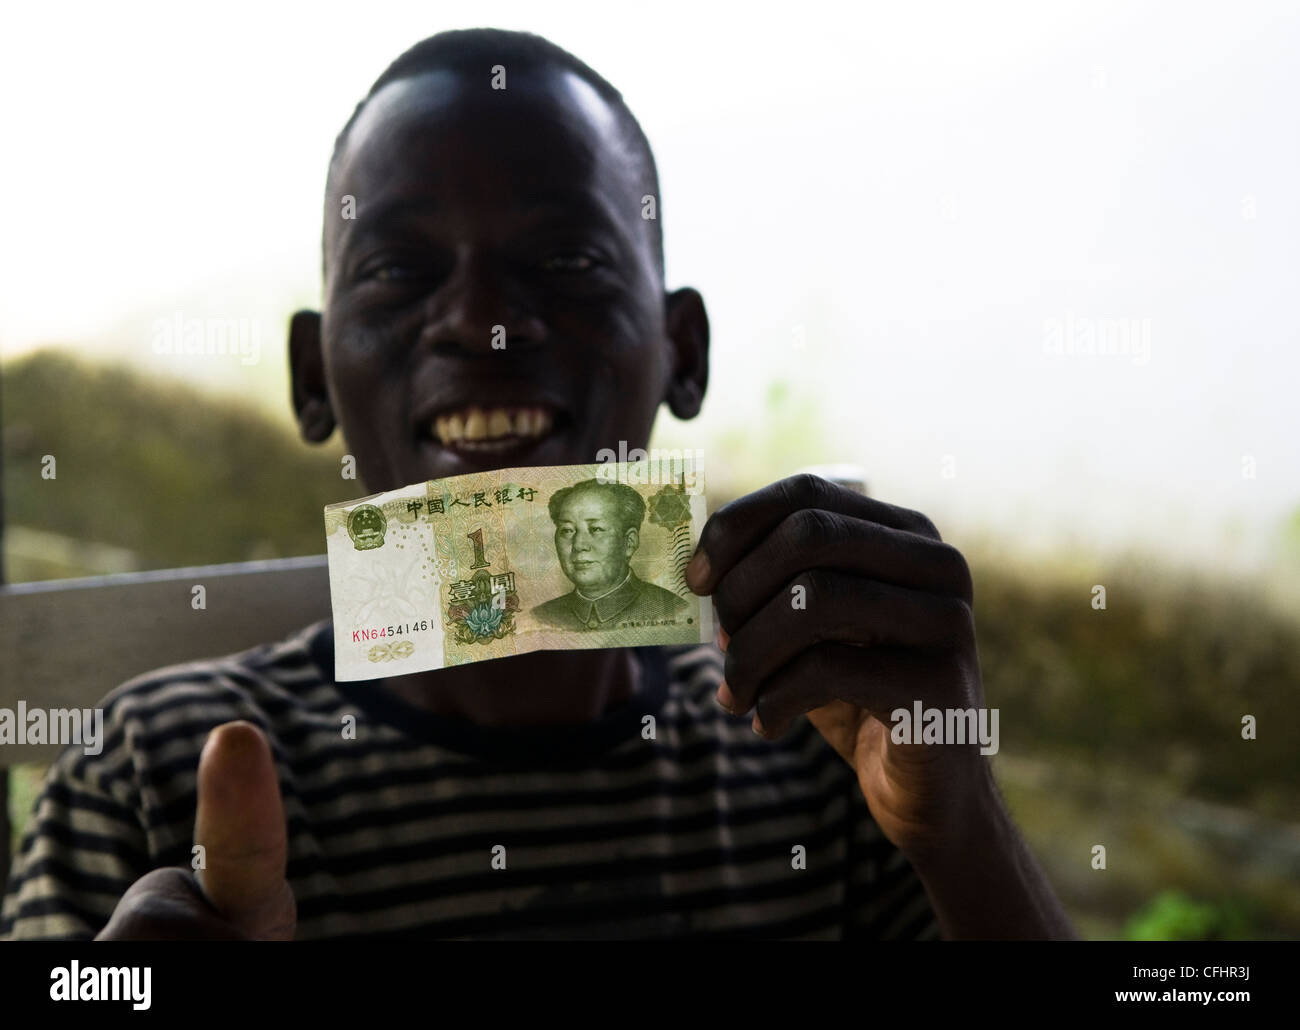 A Togolese boy holding a 1 RMB note. China has a strong presence in Africa building new infrastructure in return for resources. Stock Photo